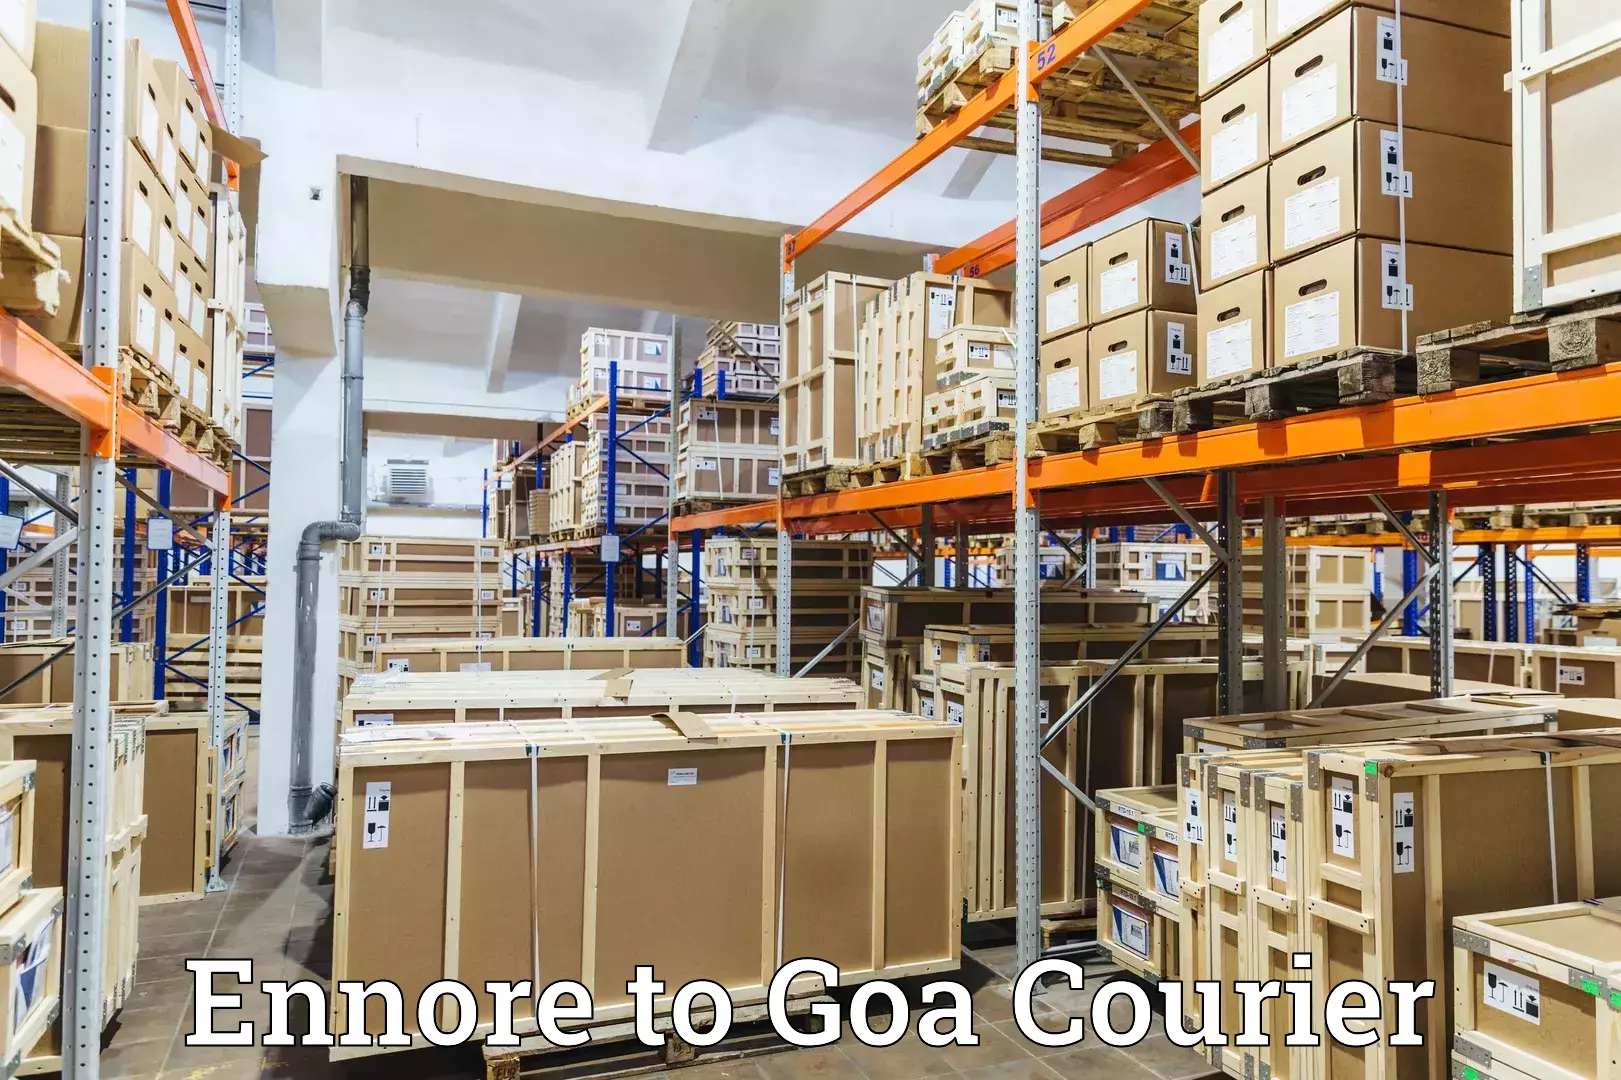 Efficient order fulfillment Ennore to Goa